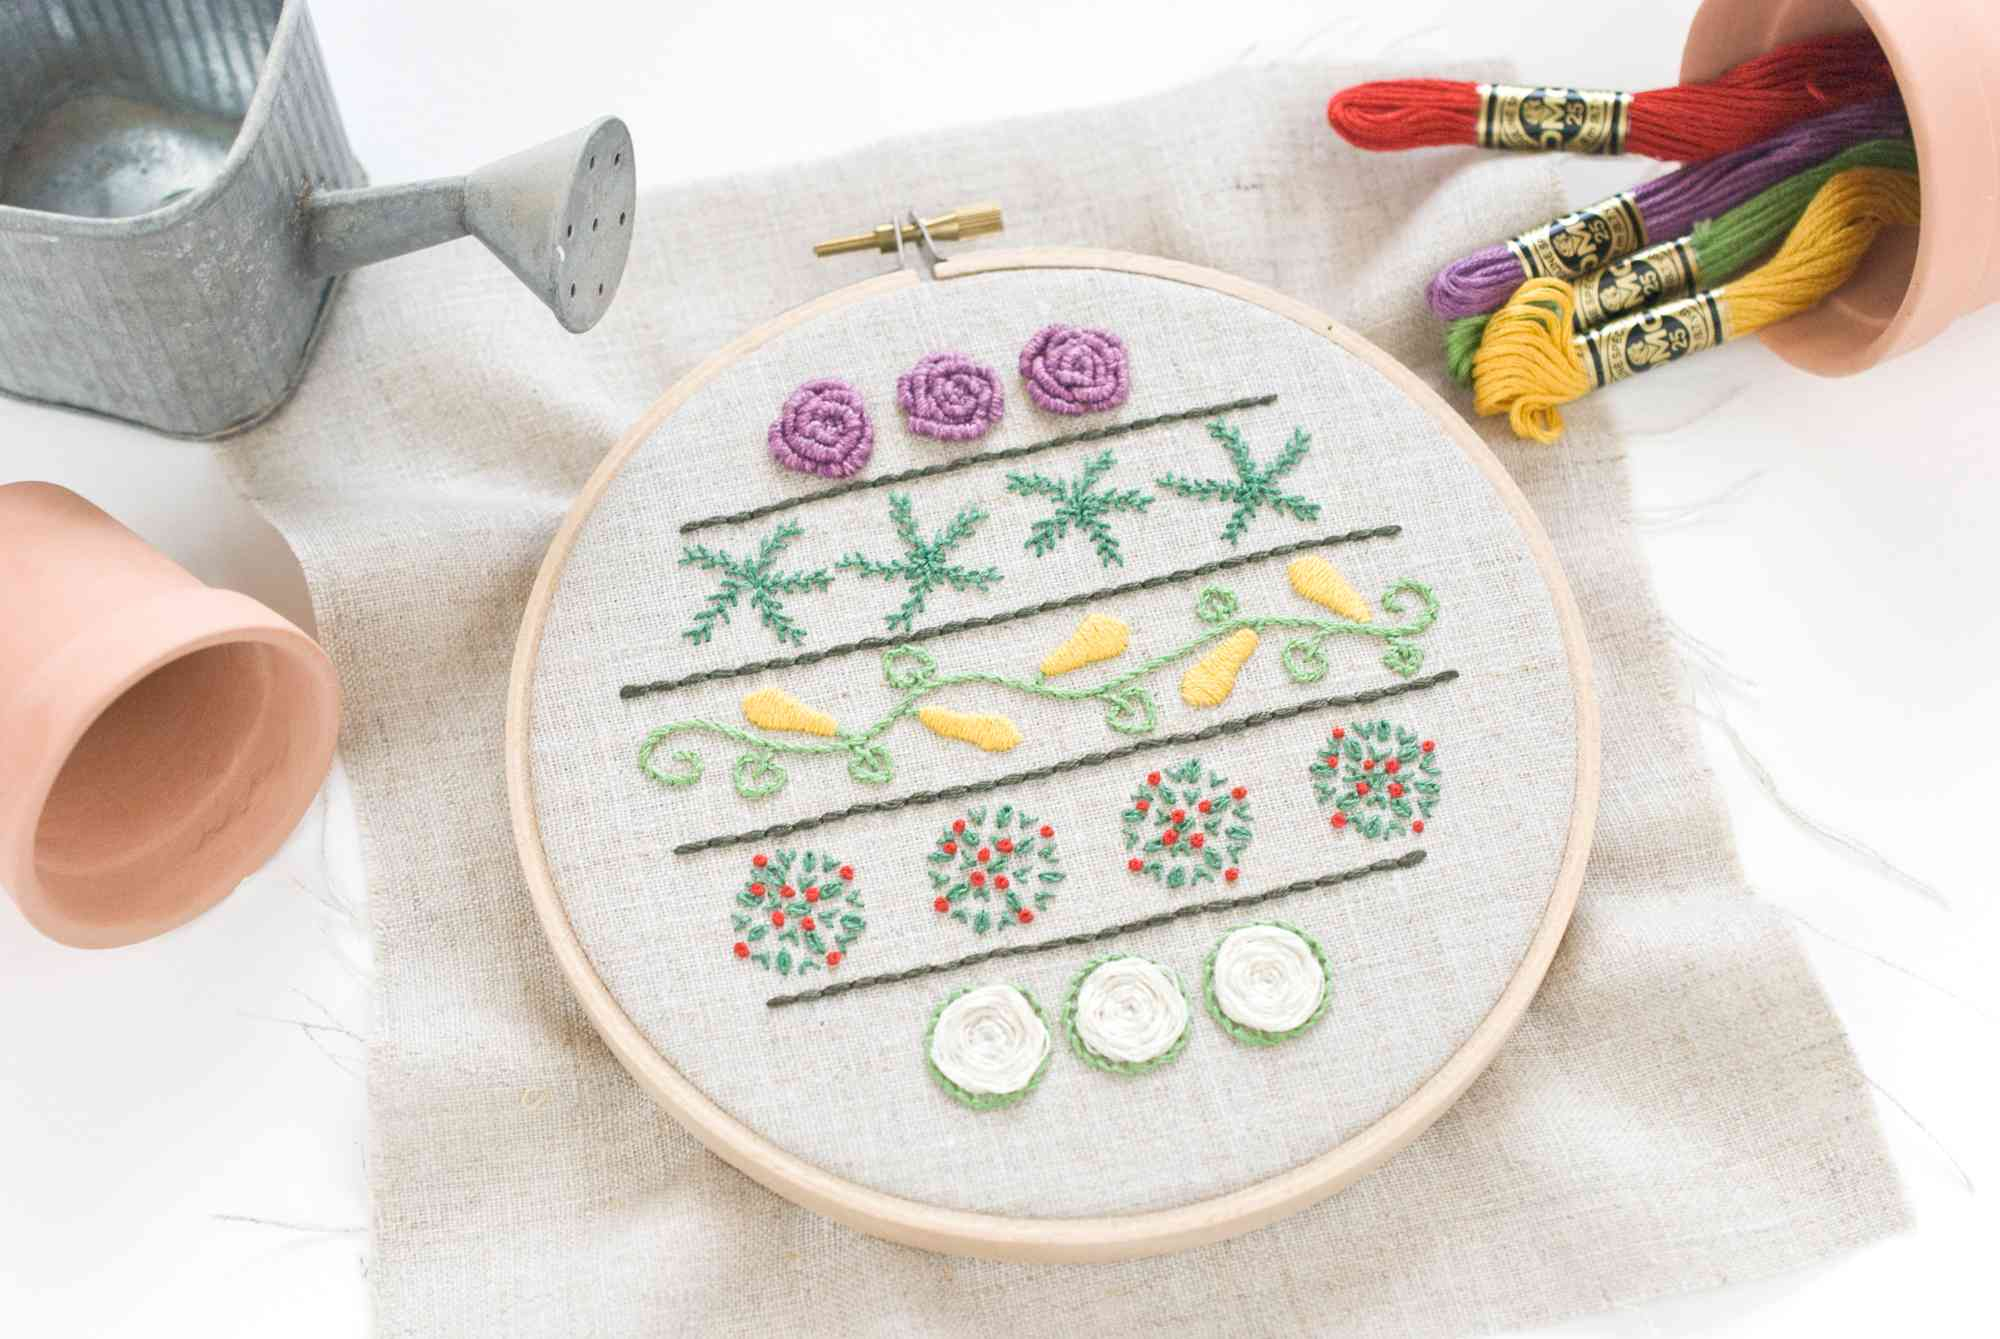 English Embroidery Patterns 10 Gardening Inspired Embroidery Patterns